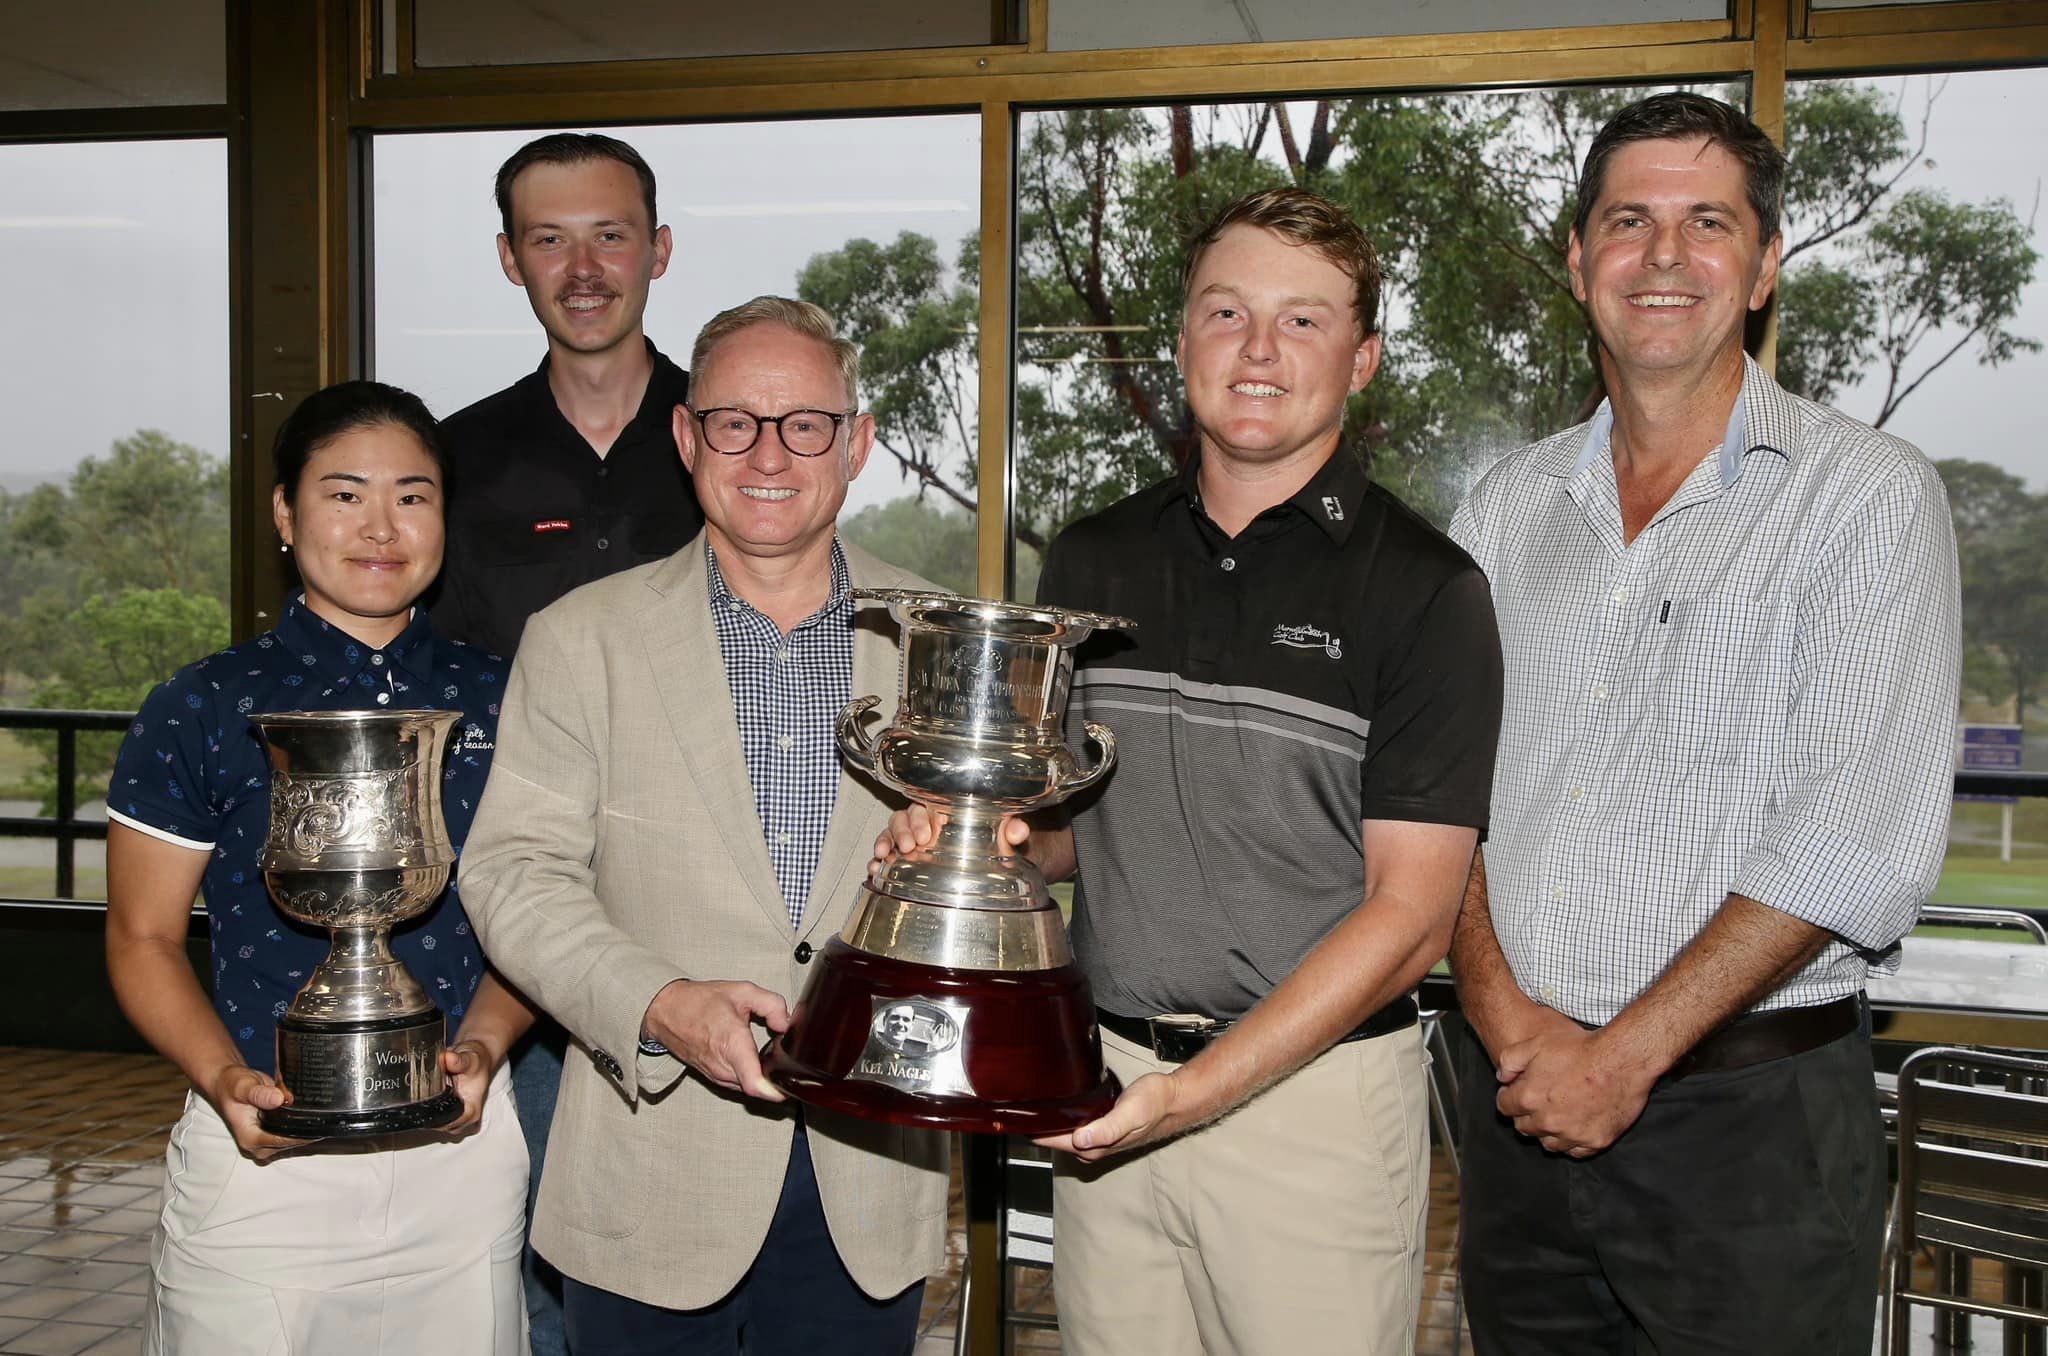 NSW LIBERAL AND NATIONALS GOVERNMENT GOLF PARTNERSHIP A BIG HIT FOR BRANXTON